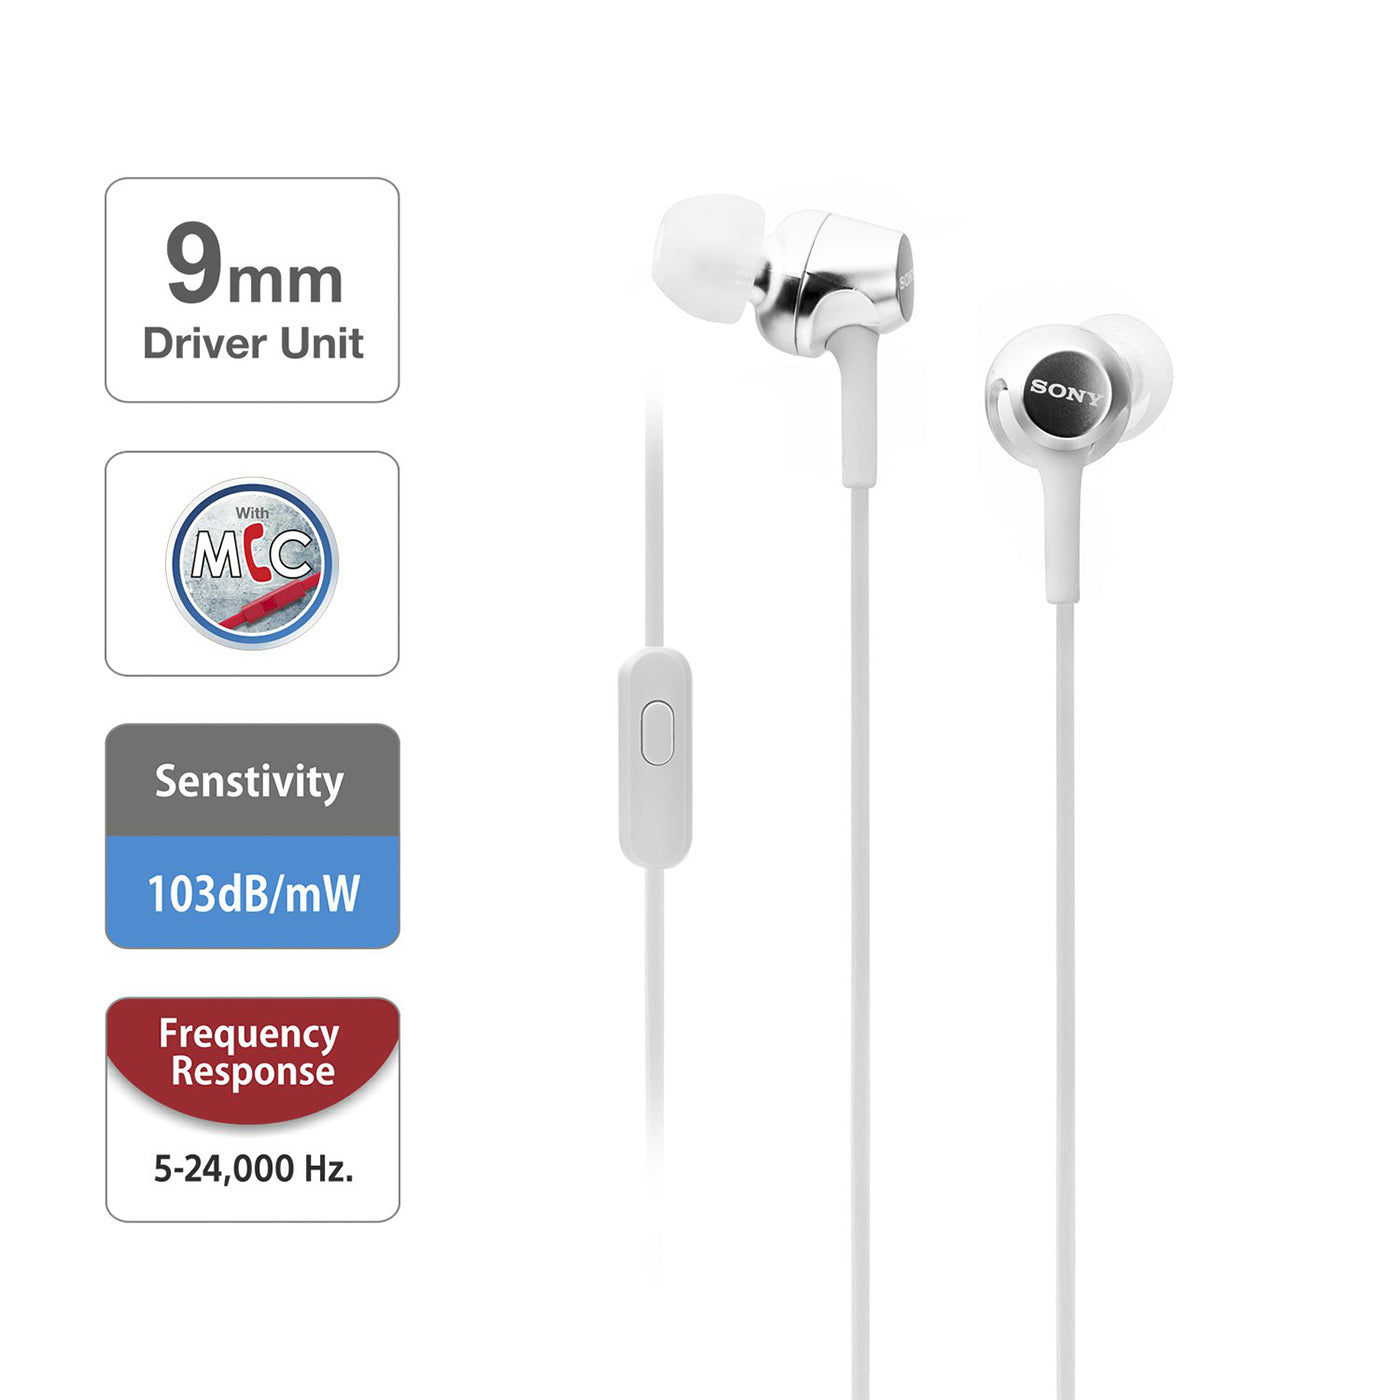 Sony MDR-EX155AP Wired In-Ear Headphones with Tangle Free Cable, Headset with Mic for Phone Calls